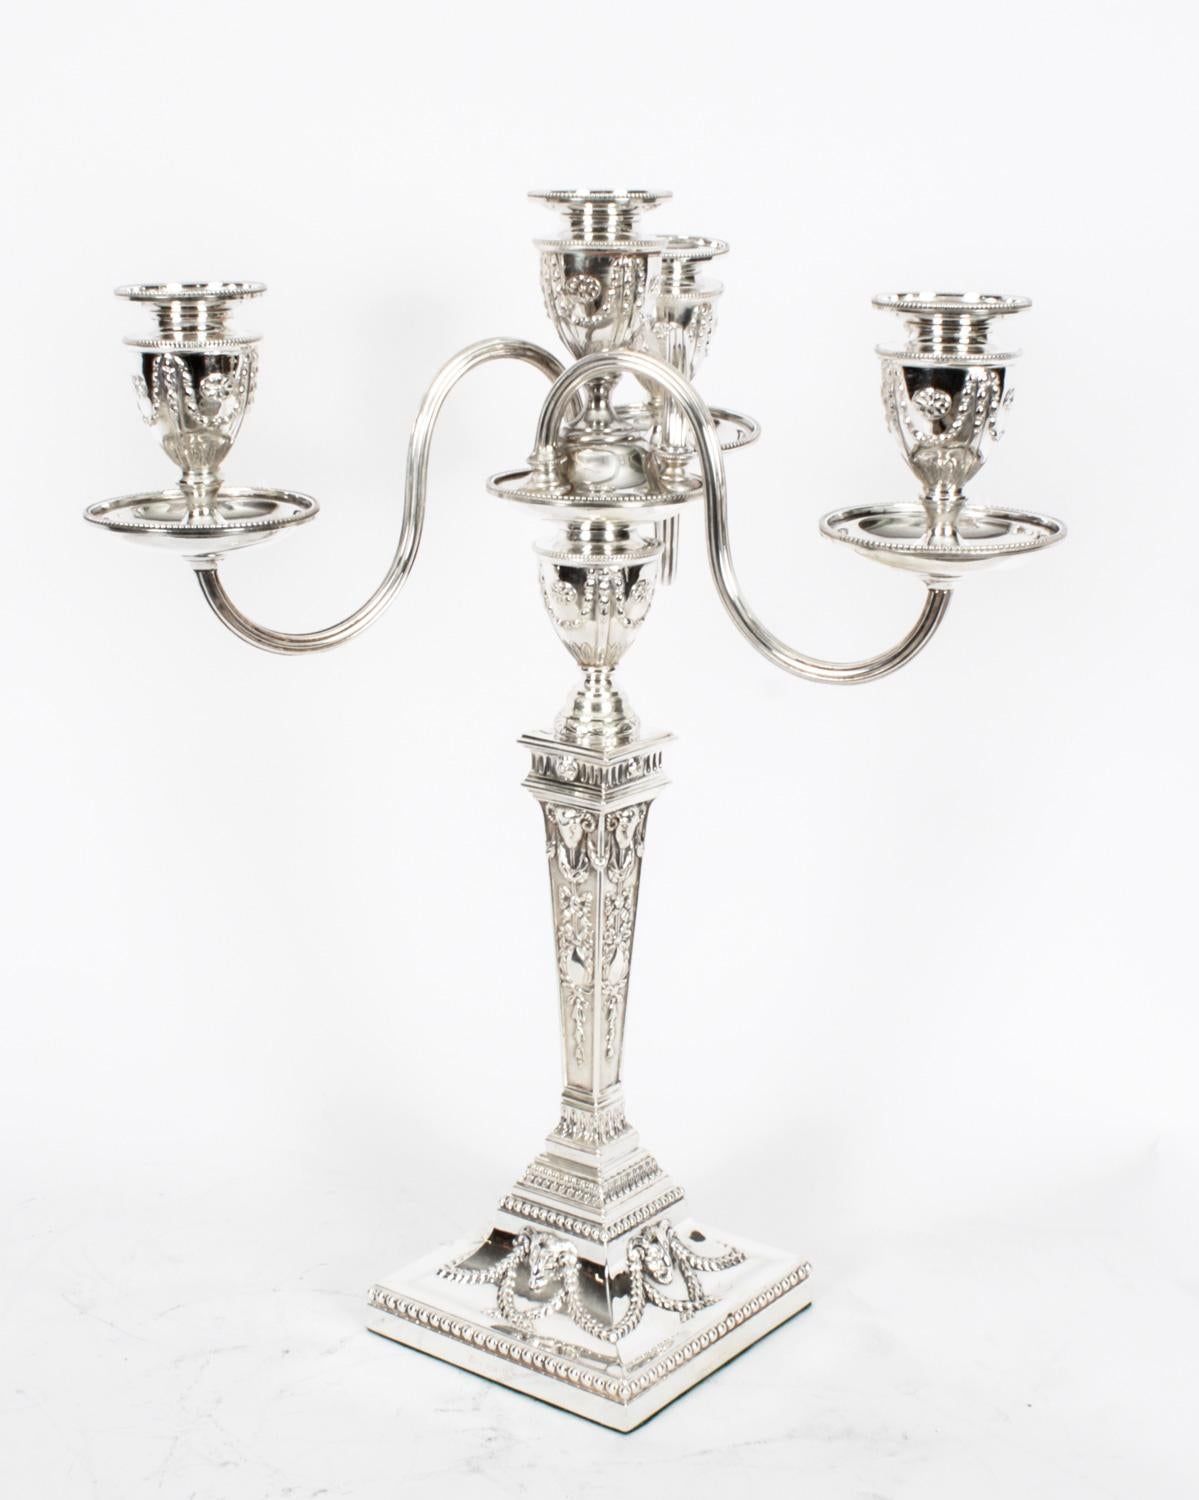 This is a stunning pair of English antique neo classical design Victorian silver plated, four light, three-branch table candelabra, circa 1865 in date, and each bearing the makers mark of the renowned English silversmiths Elkington & Co.

The